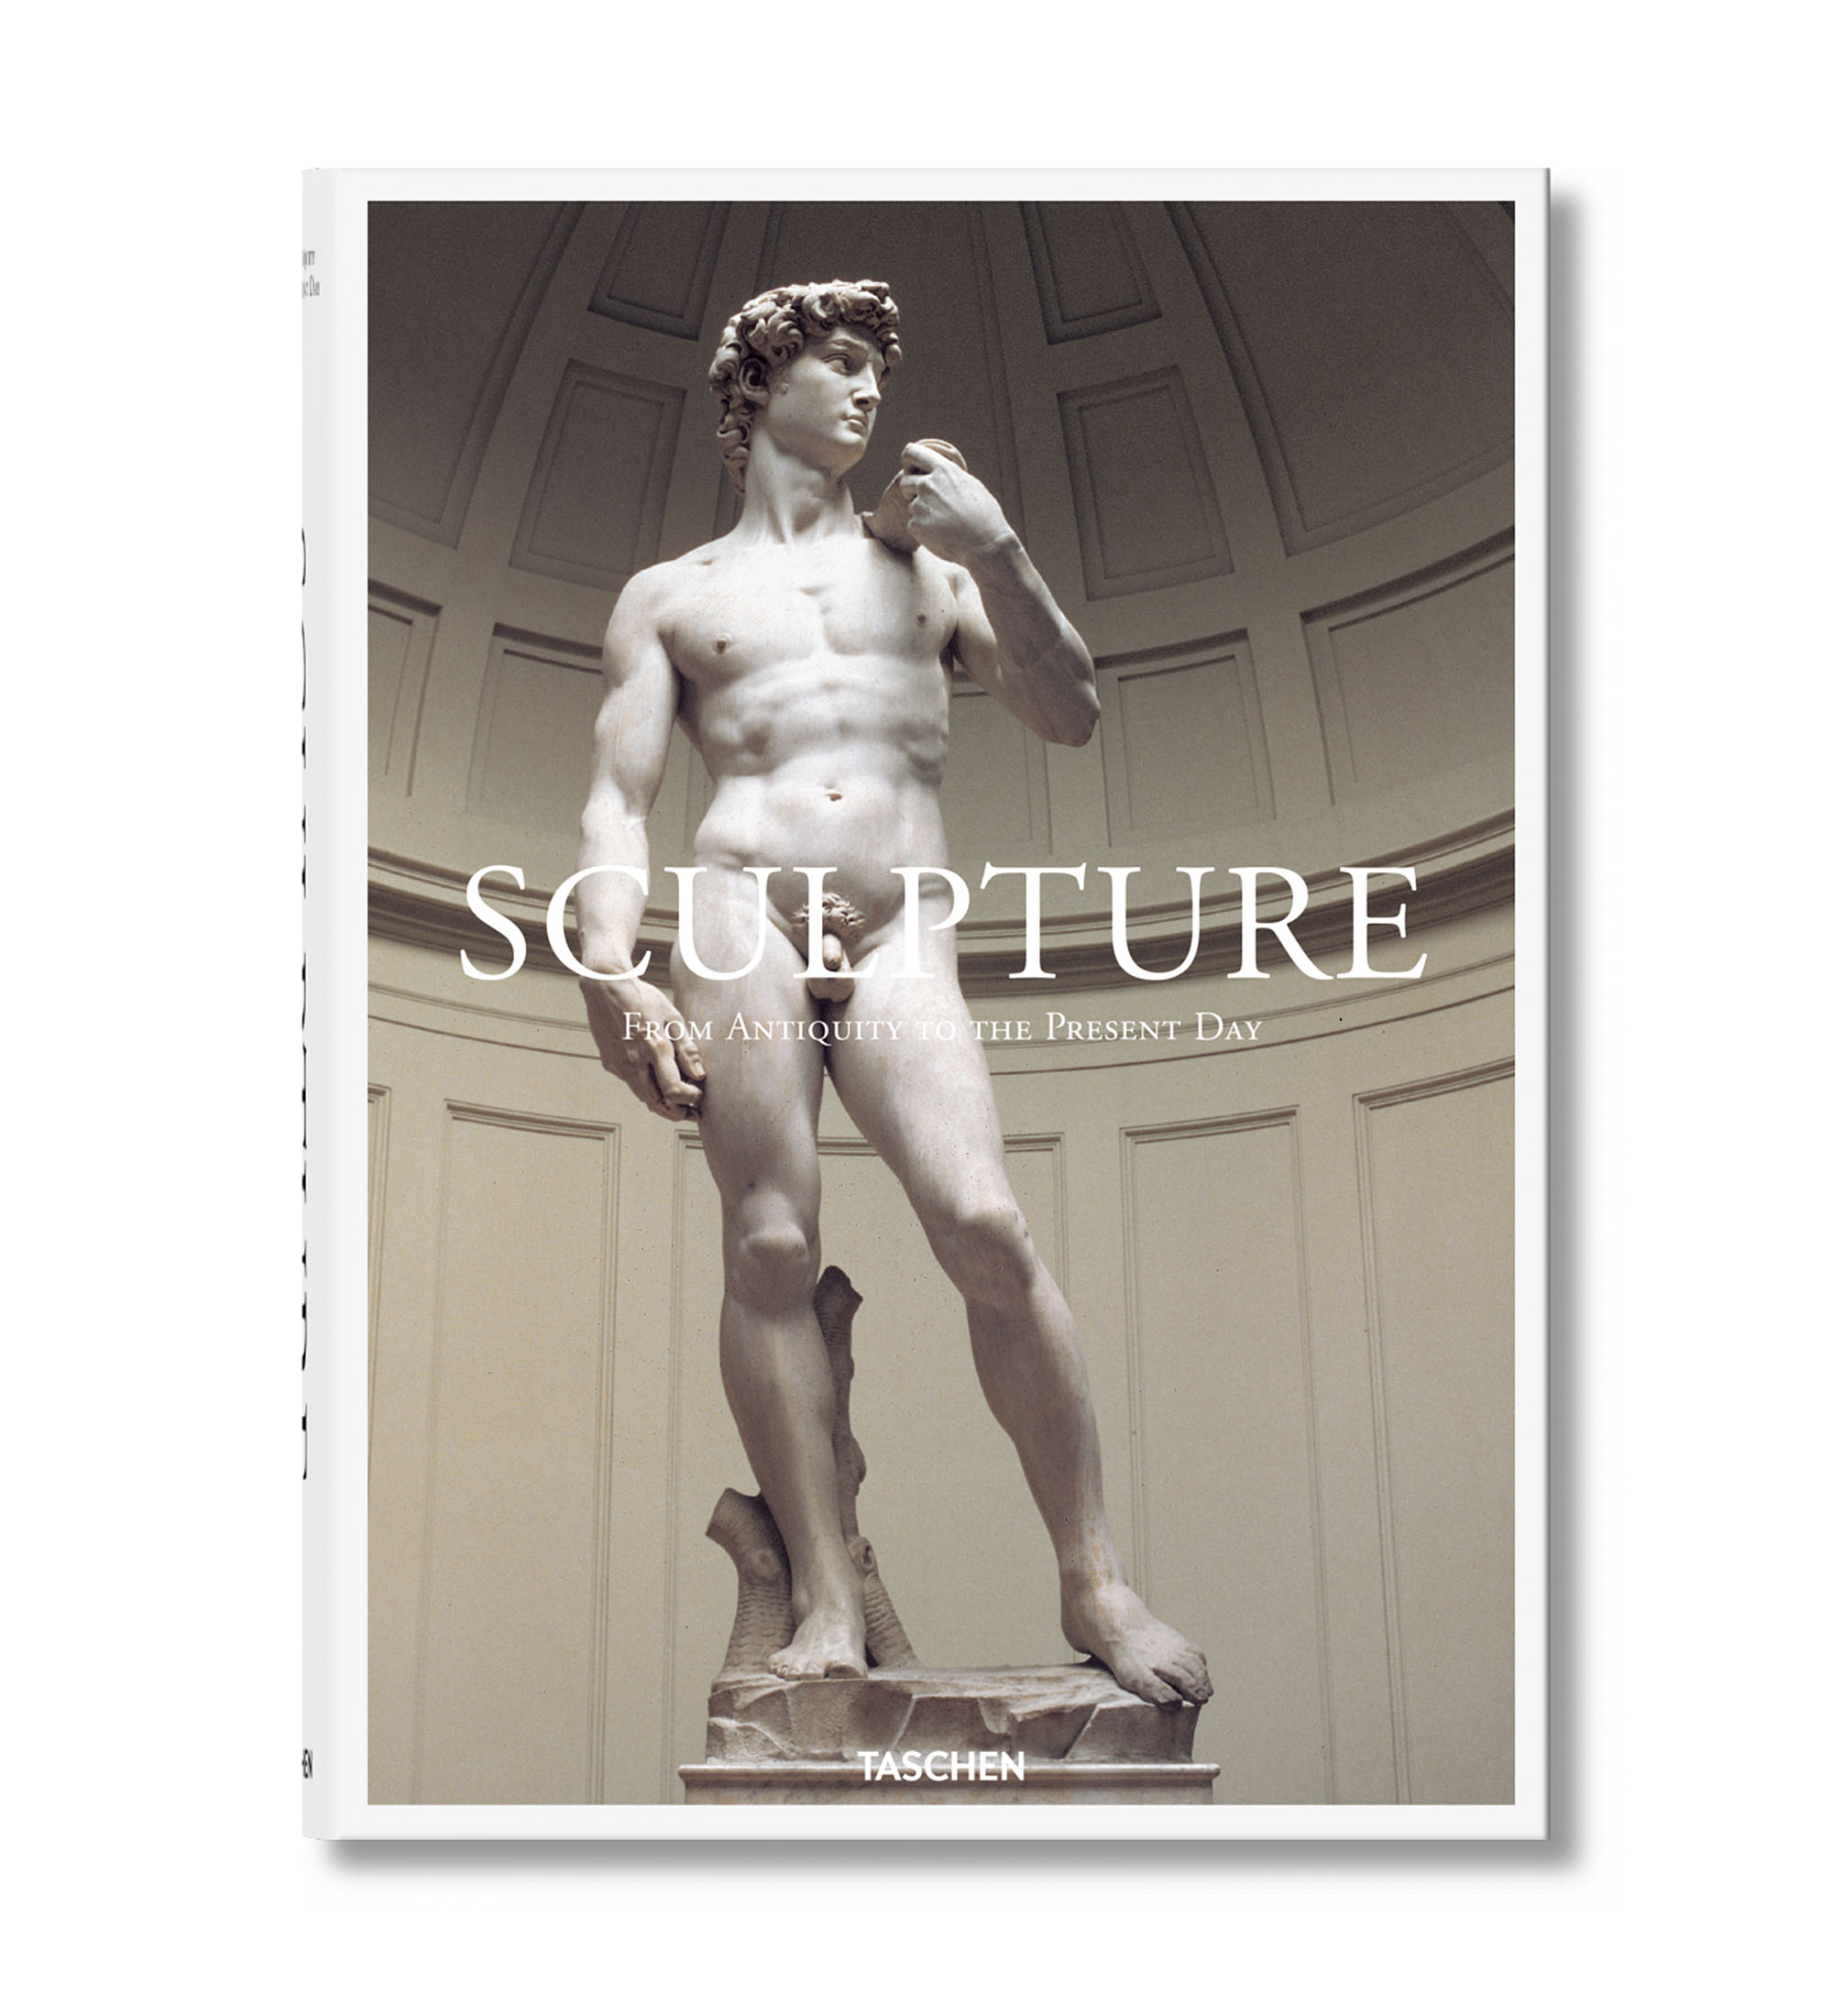 SCULPTURE: FROM ANTIQUITY TO THE PRESENT DAY